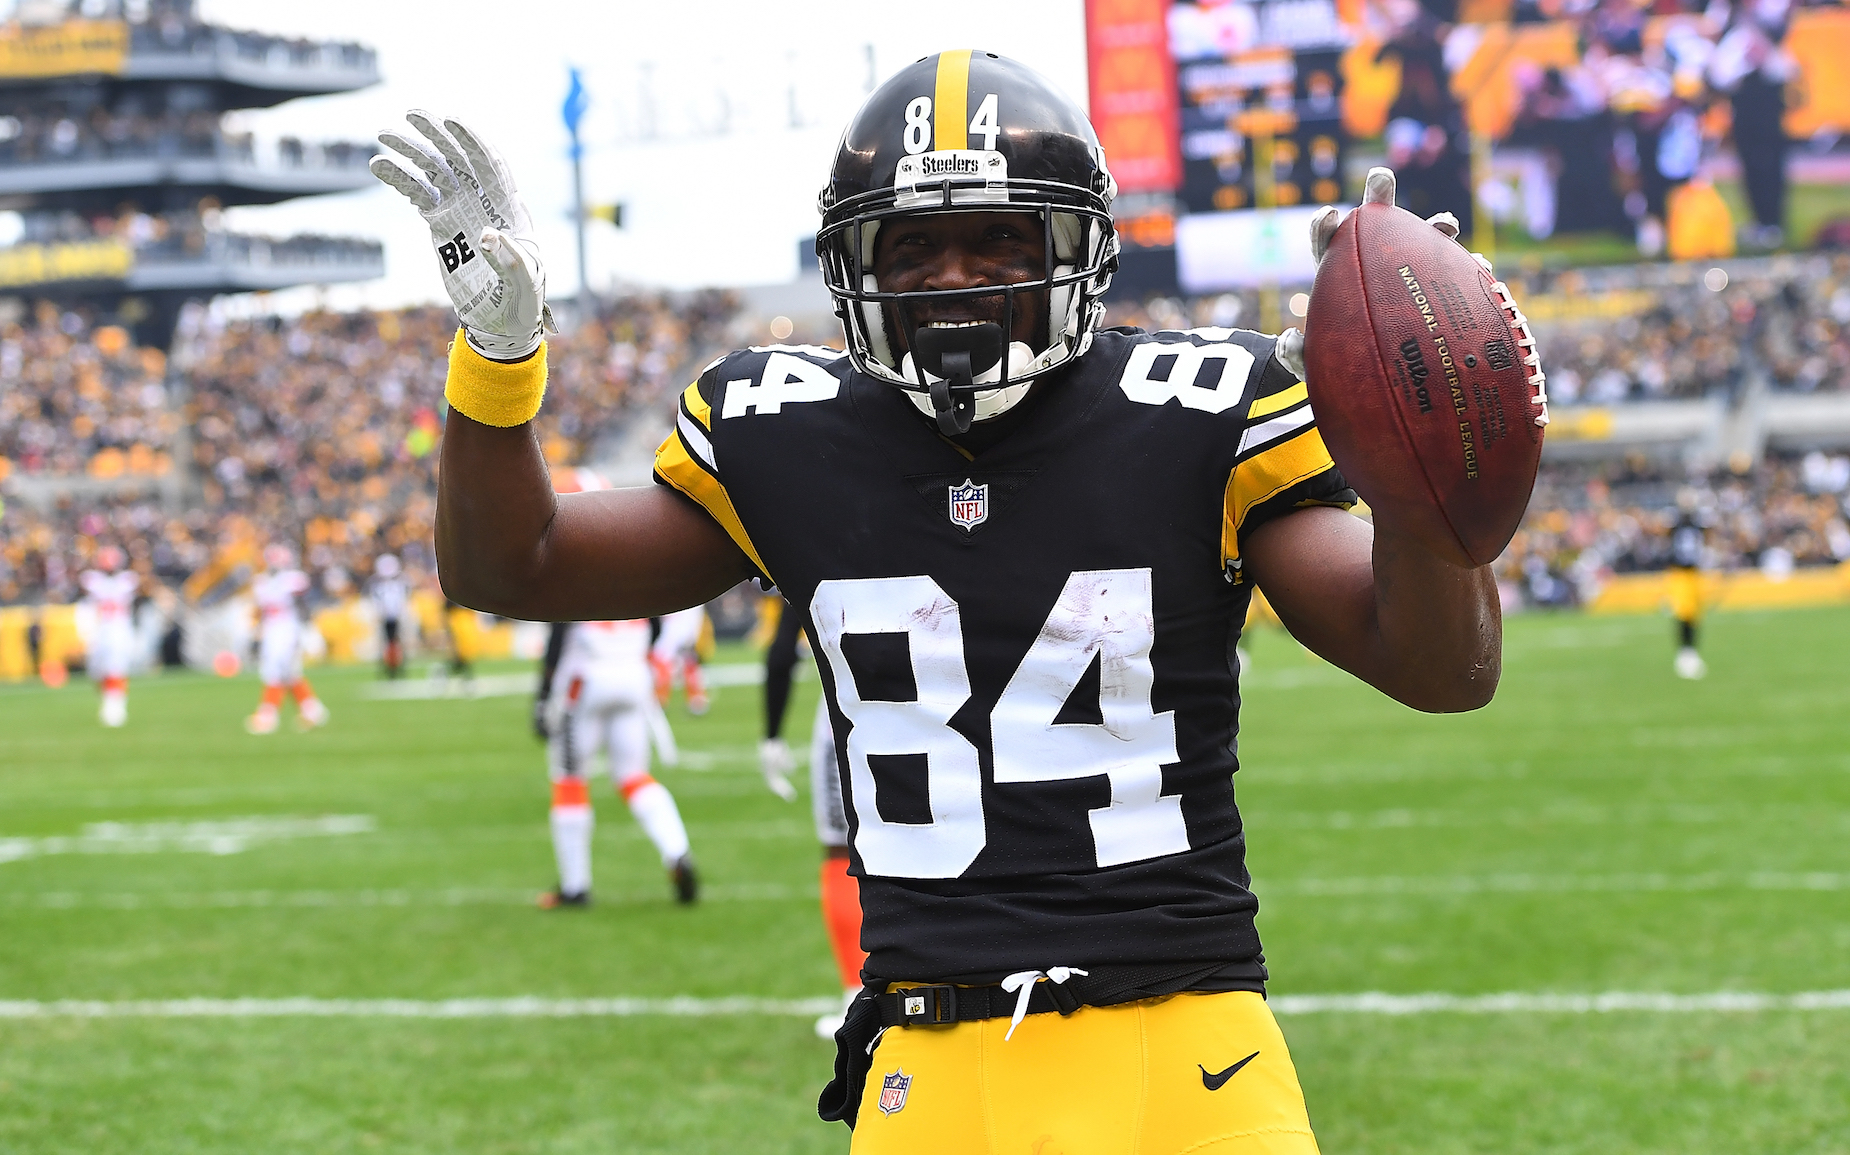 Antonio Brown has a personal reason for wearing number 84 on his jersey.